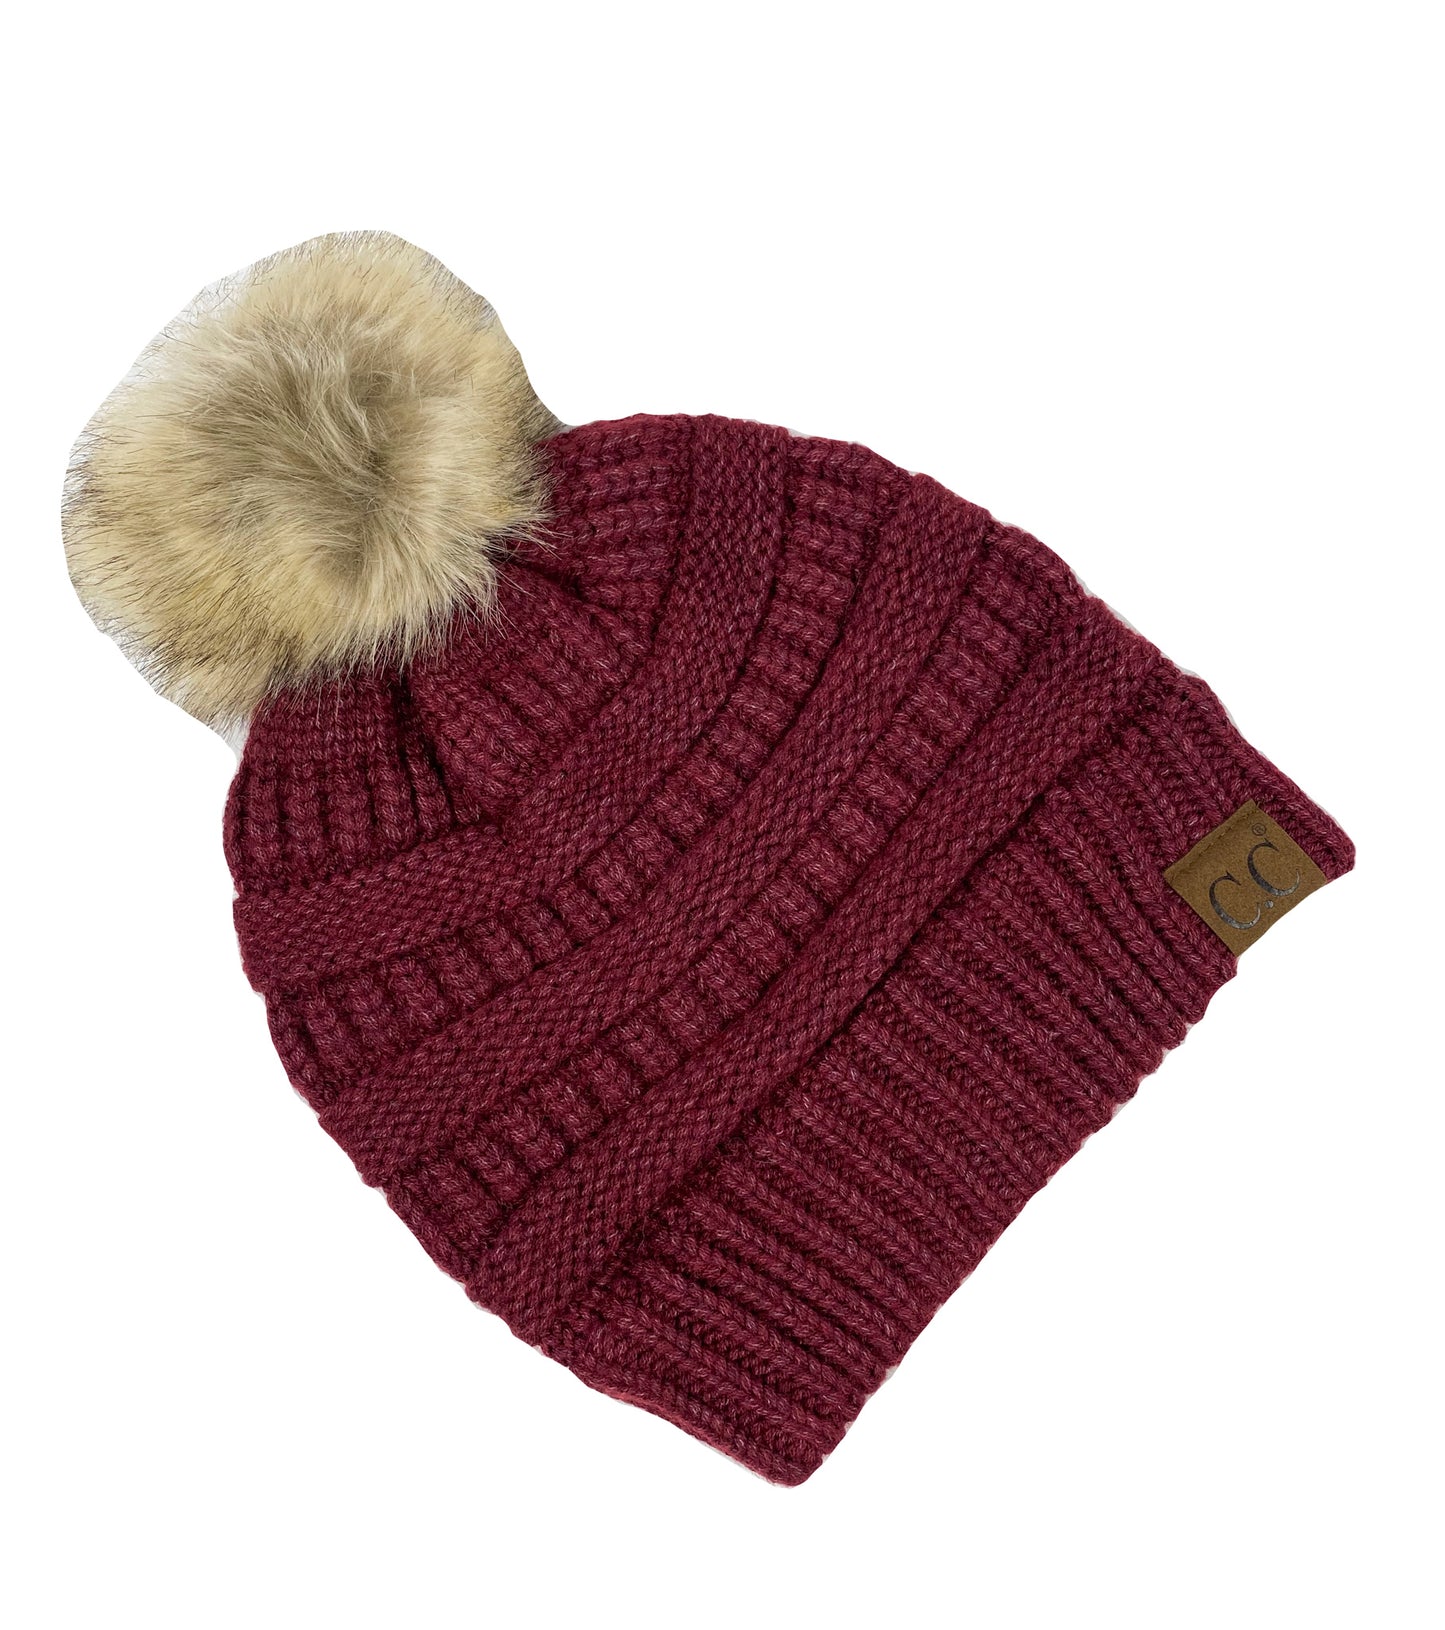 C.C Classic Beanies for Adults, Winter Hats, Winter Beanies, Premium Hats, Warm Hats, Winter Accessories, CC Beanies. One size fits all. Authentic C.C Hat 100% Acrylic. Faux Fur Pom-Pom.